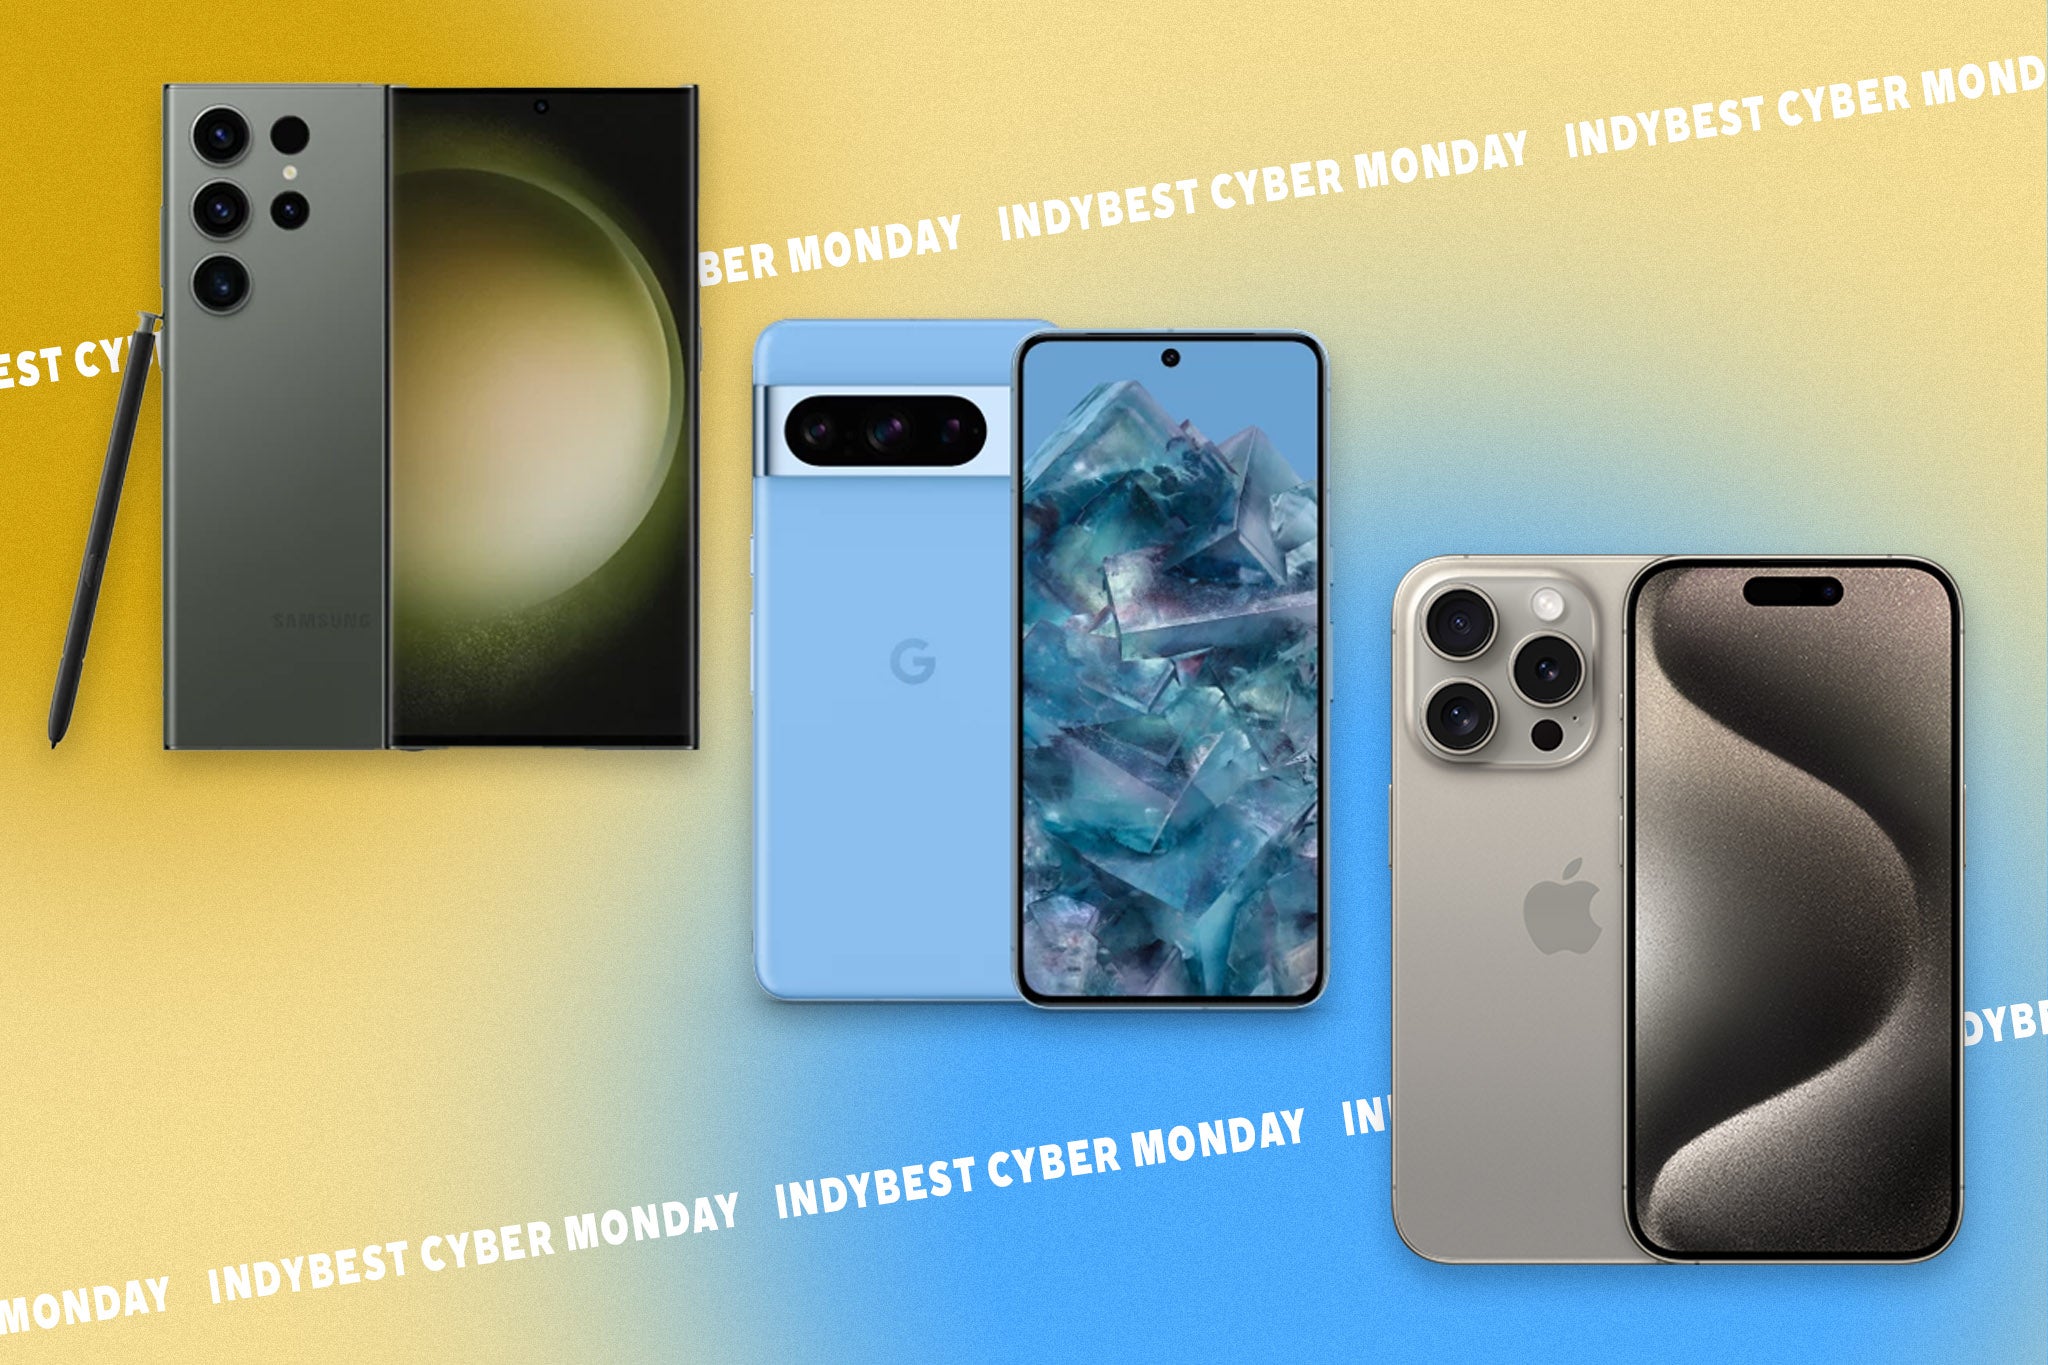 indybest, black friday, amazon, android, black friday, best cyber monday mobile phone deals on iphone, galaxy, pixel and more